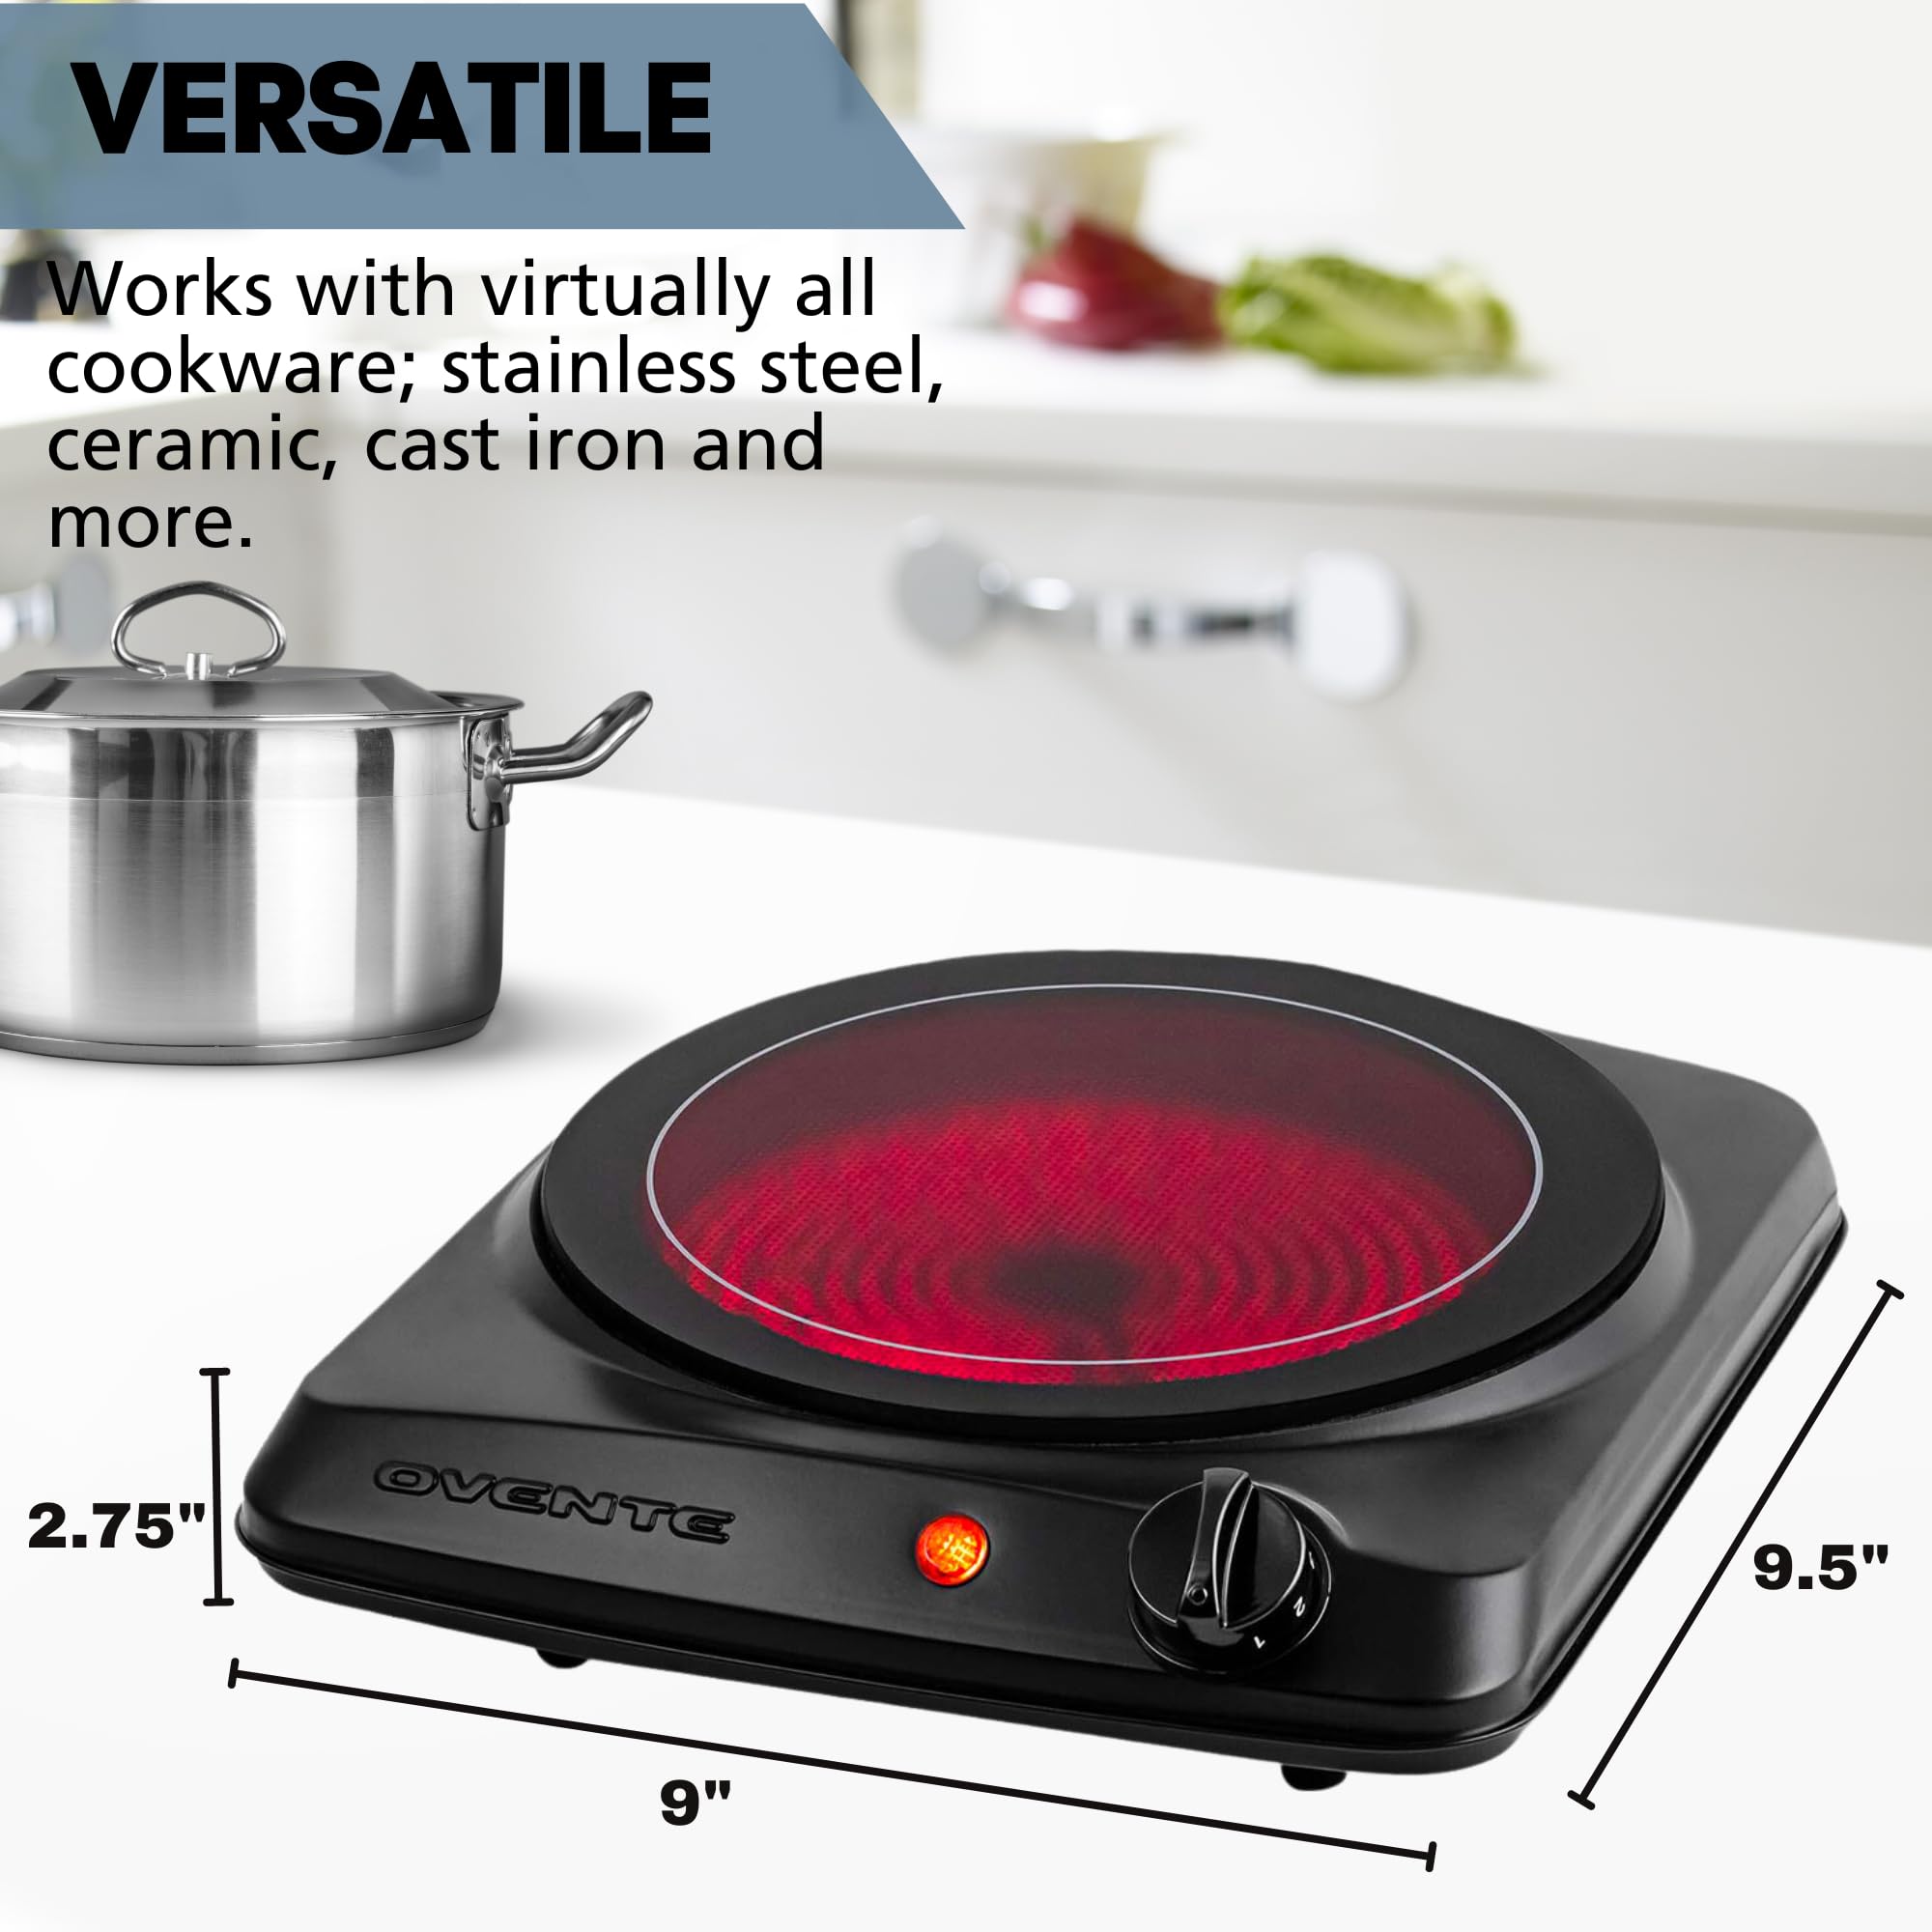 OVENTE Countertop Infrared Single Burner, 1000W Electric Hot Plate with 7” Ceramic Glass Cooktop, 5 Level Temperature Setting & Easy to Clean Base, Compact Stove for Home Dorm Office, Black BGI101B